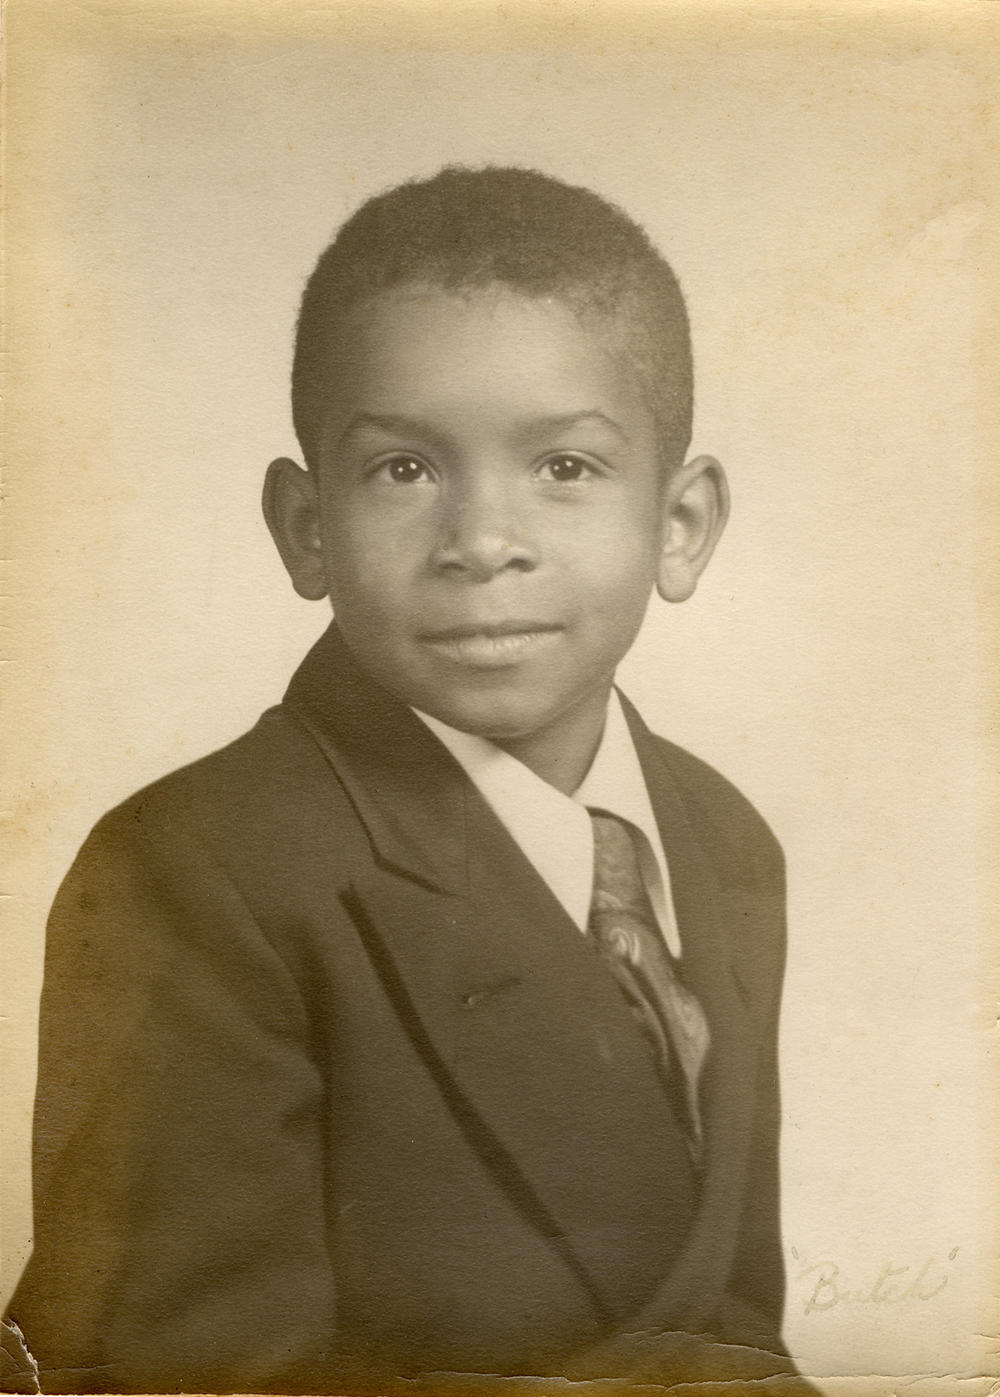 Chester Higgins as a child in Alabama.